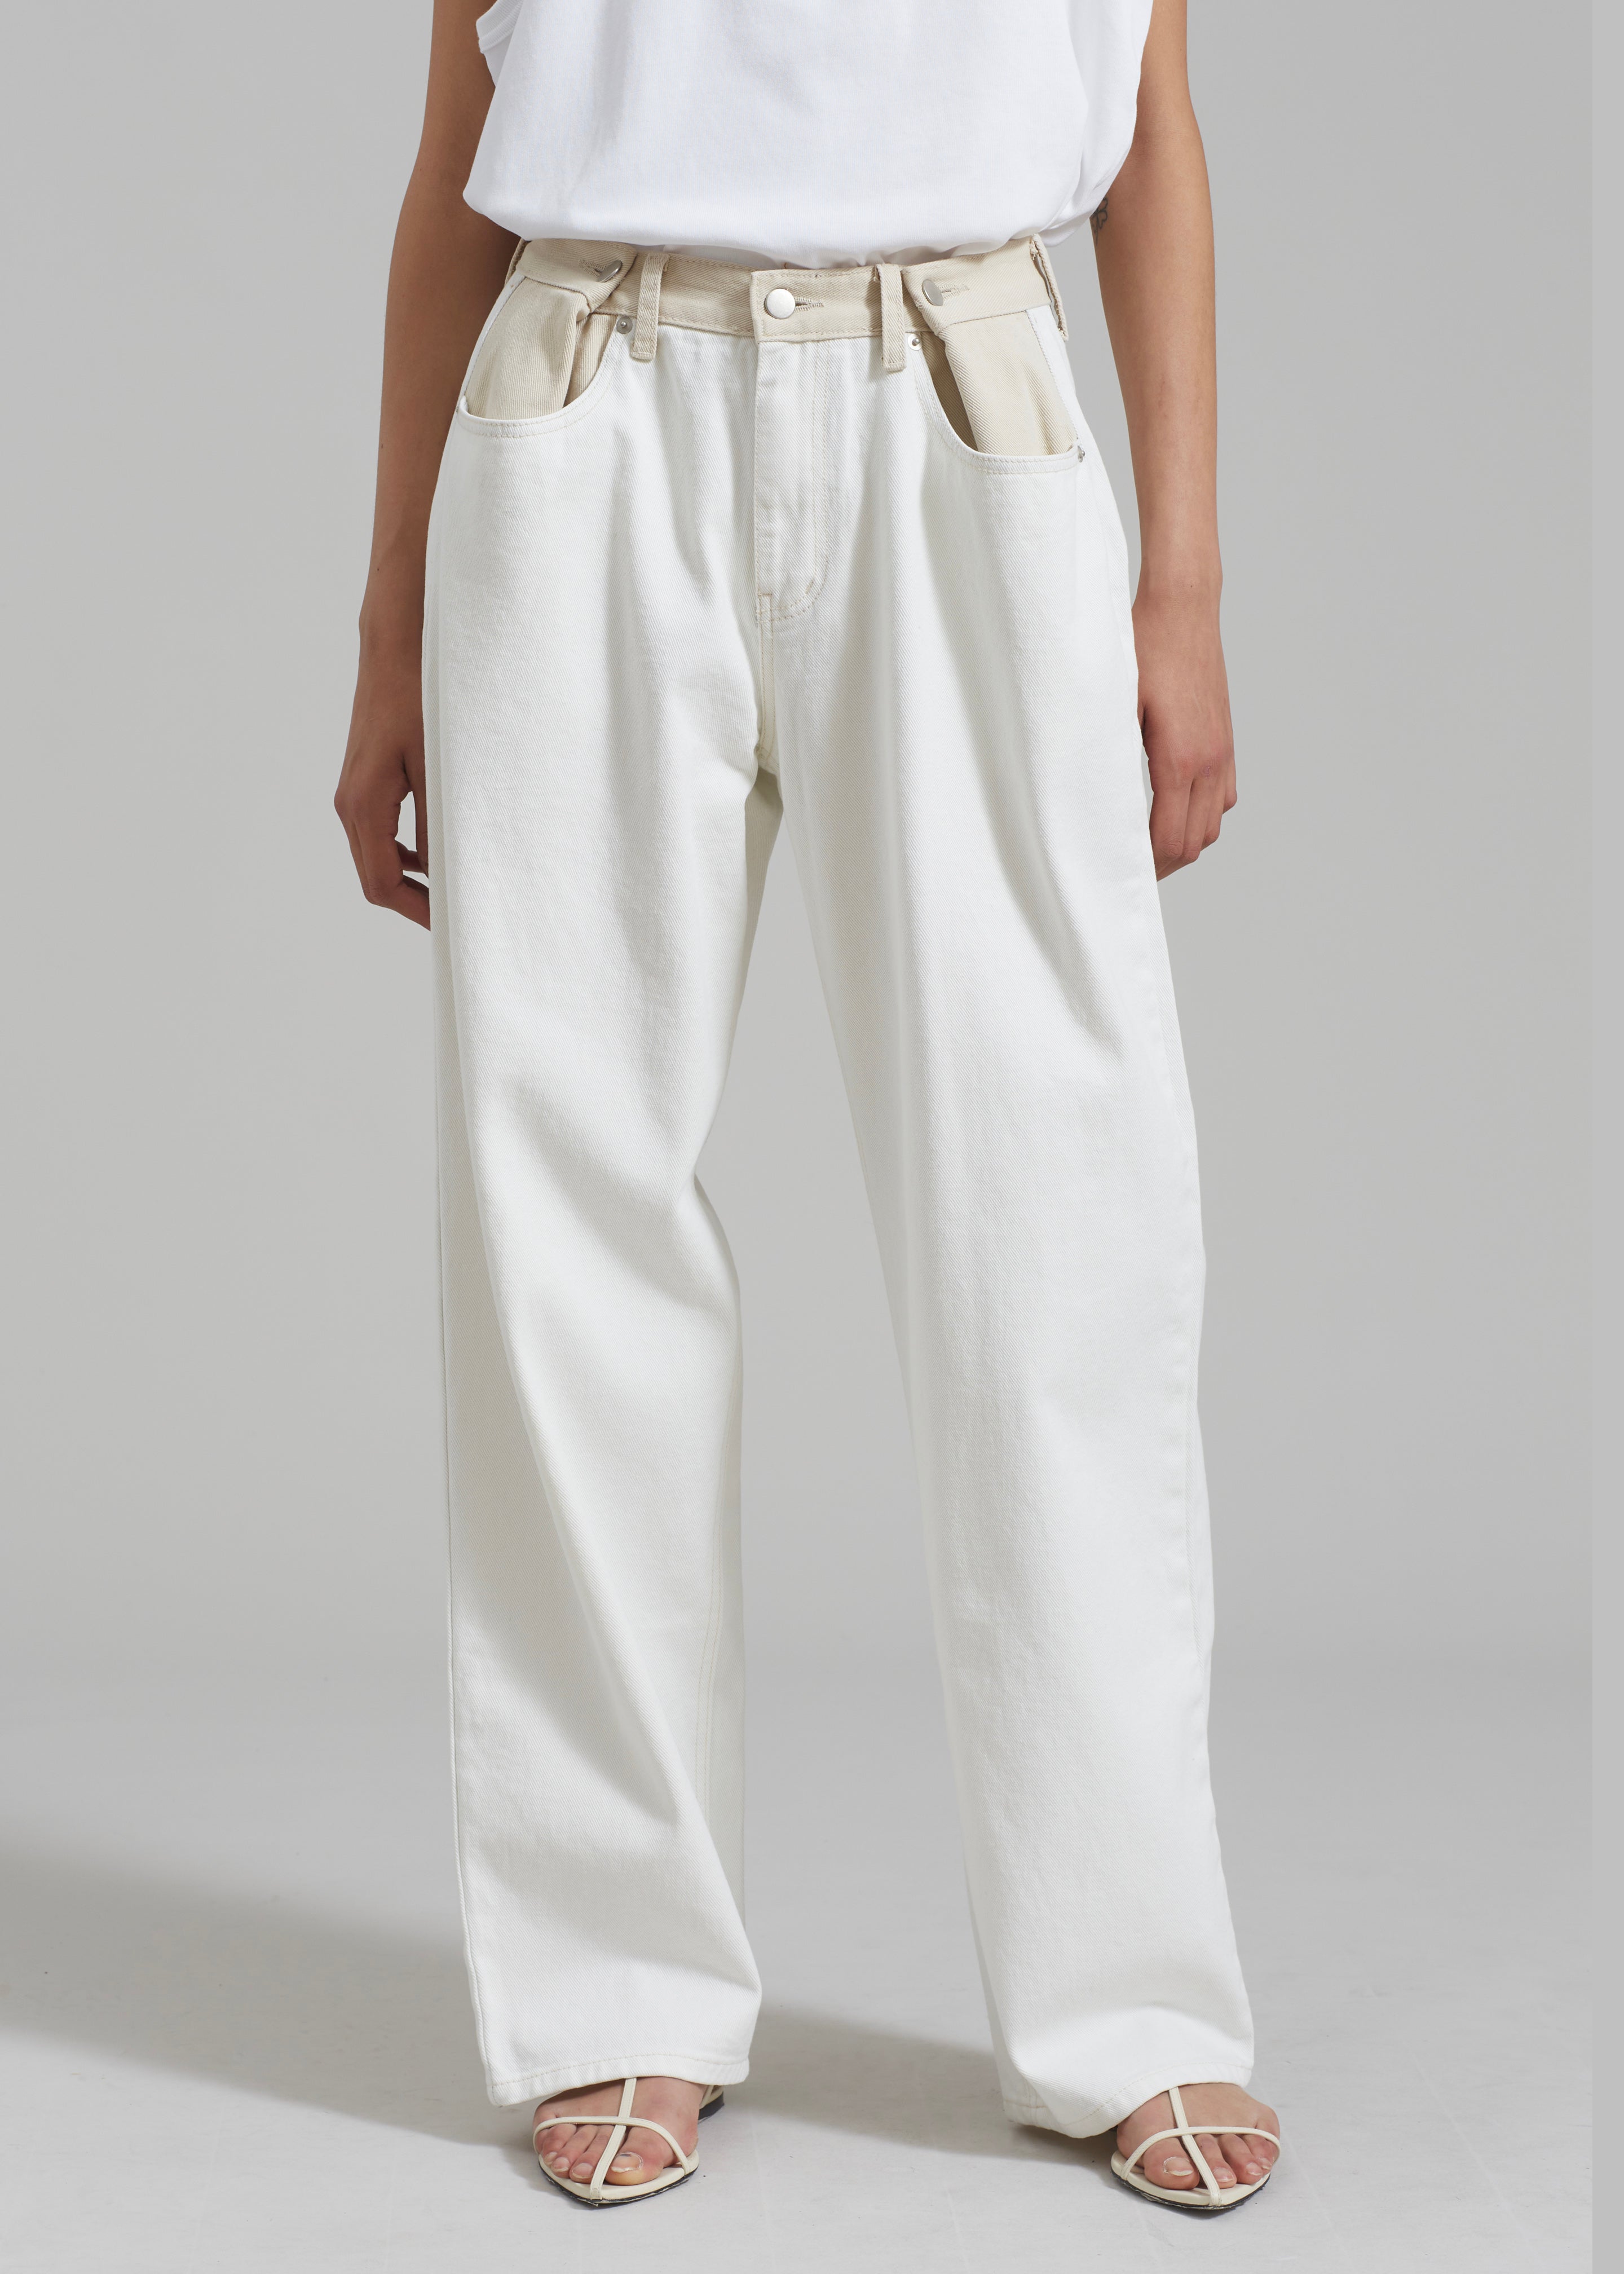 Buy BELONG WITH ME OFF WHITE DENIM JEANS for Women Online in India